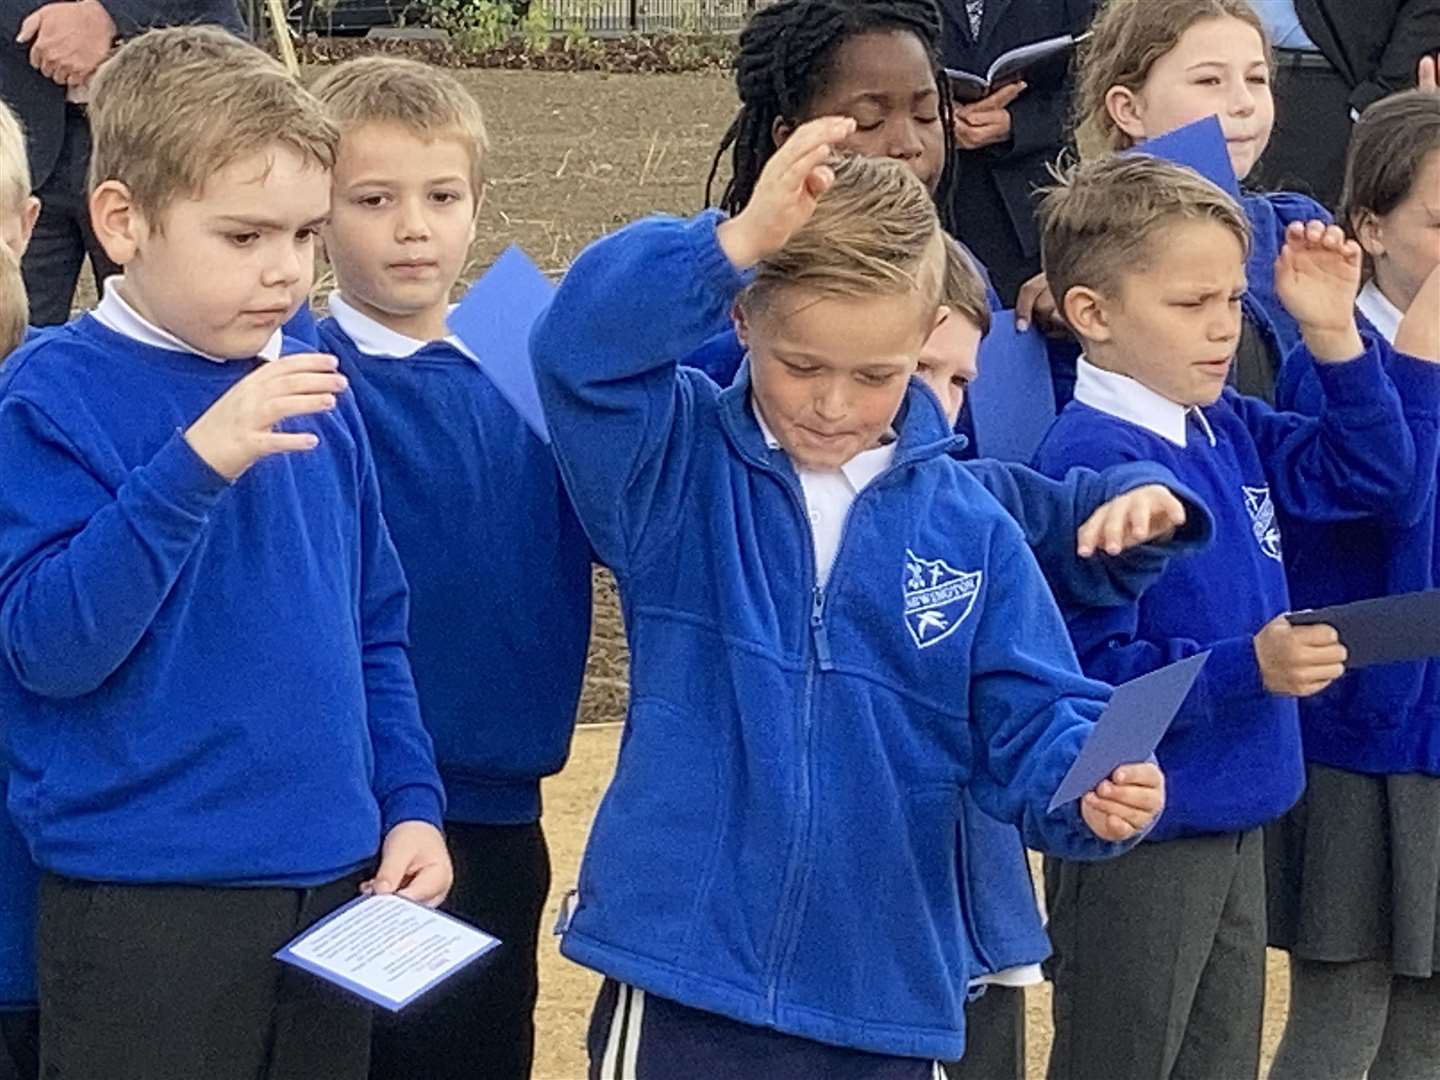 Year 3 pupils from Newington Church of England Primary School entertained guest at the opening of the 2,000-year-old temple with a song called Just Like A Roman